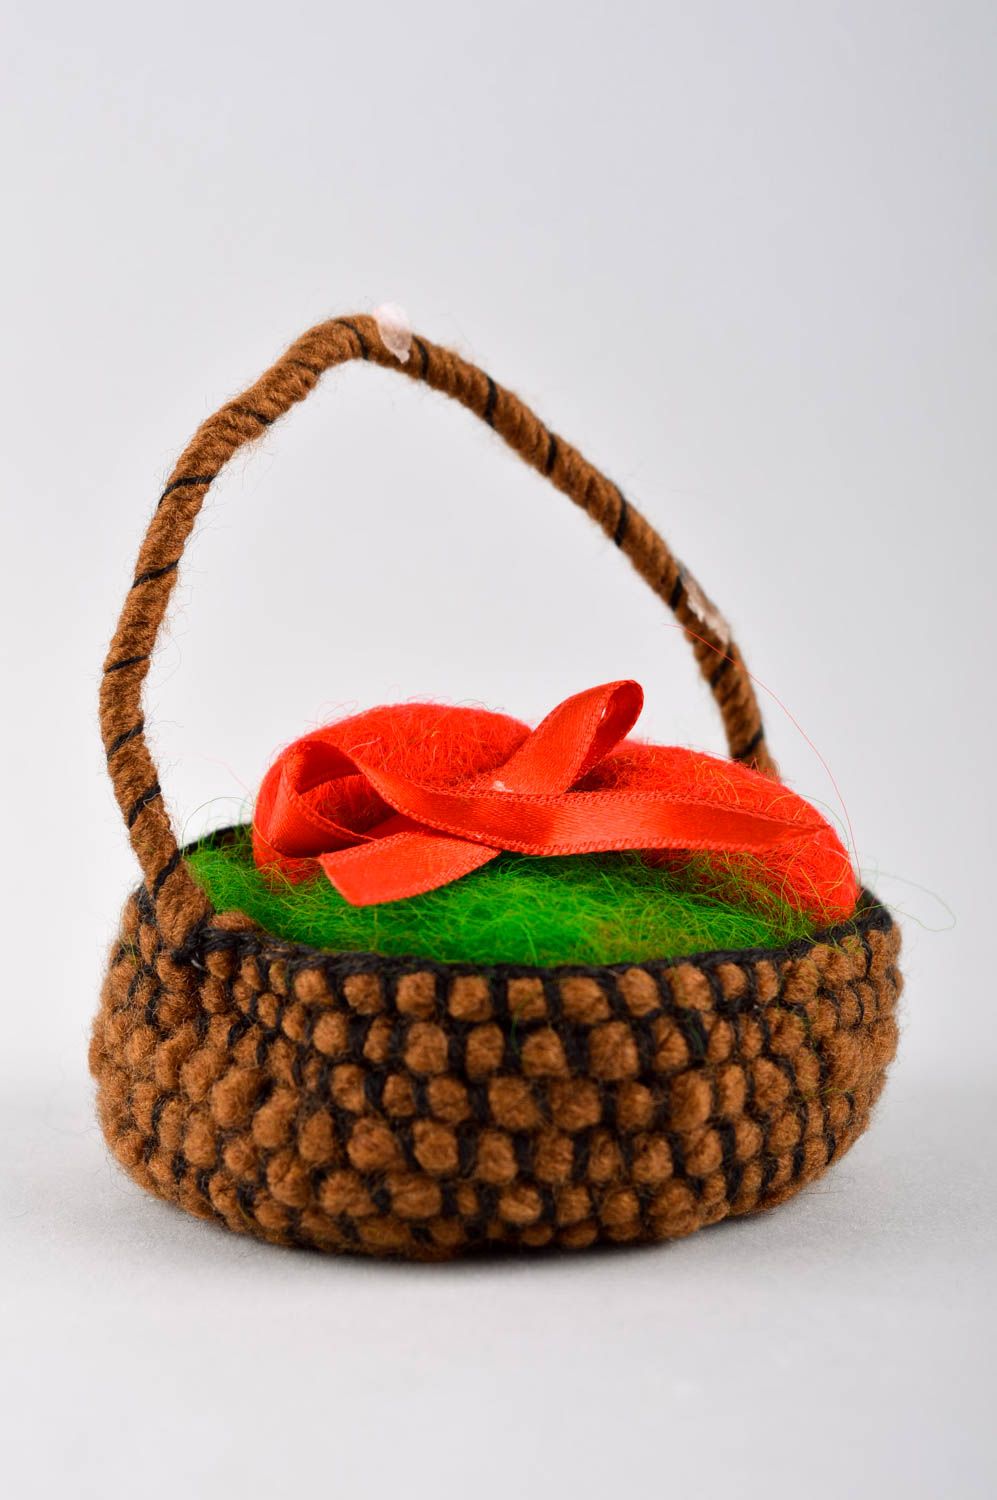 Handmade basket unusual decor for interior decorative use only gift ideas photo 3